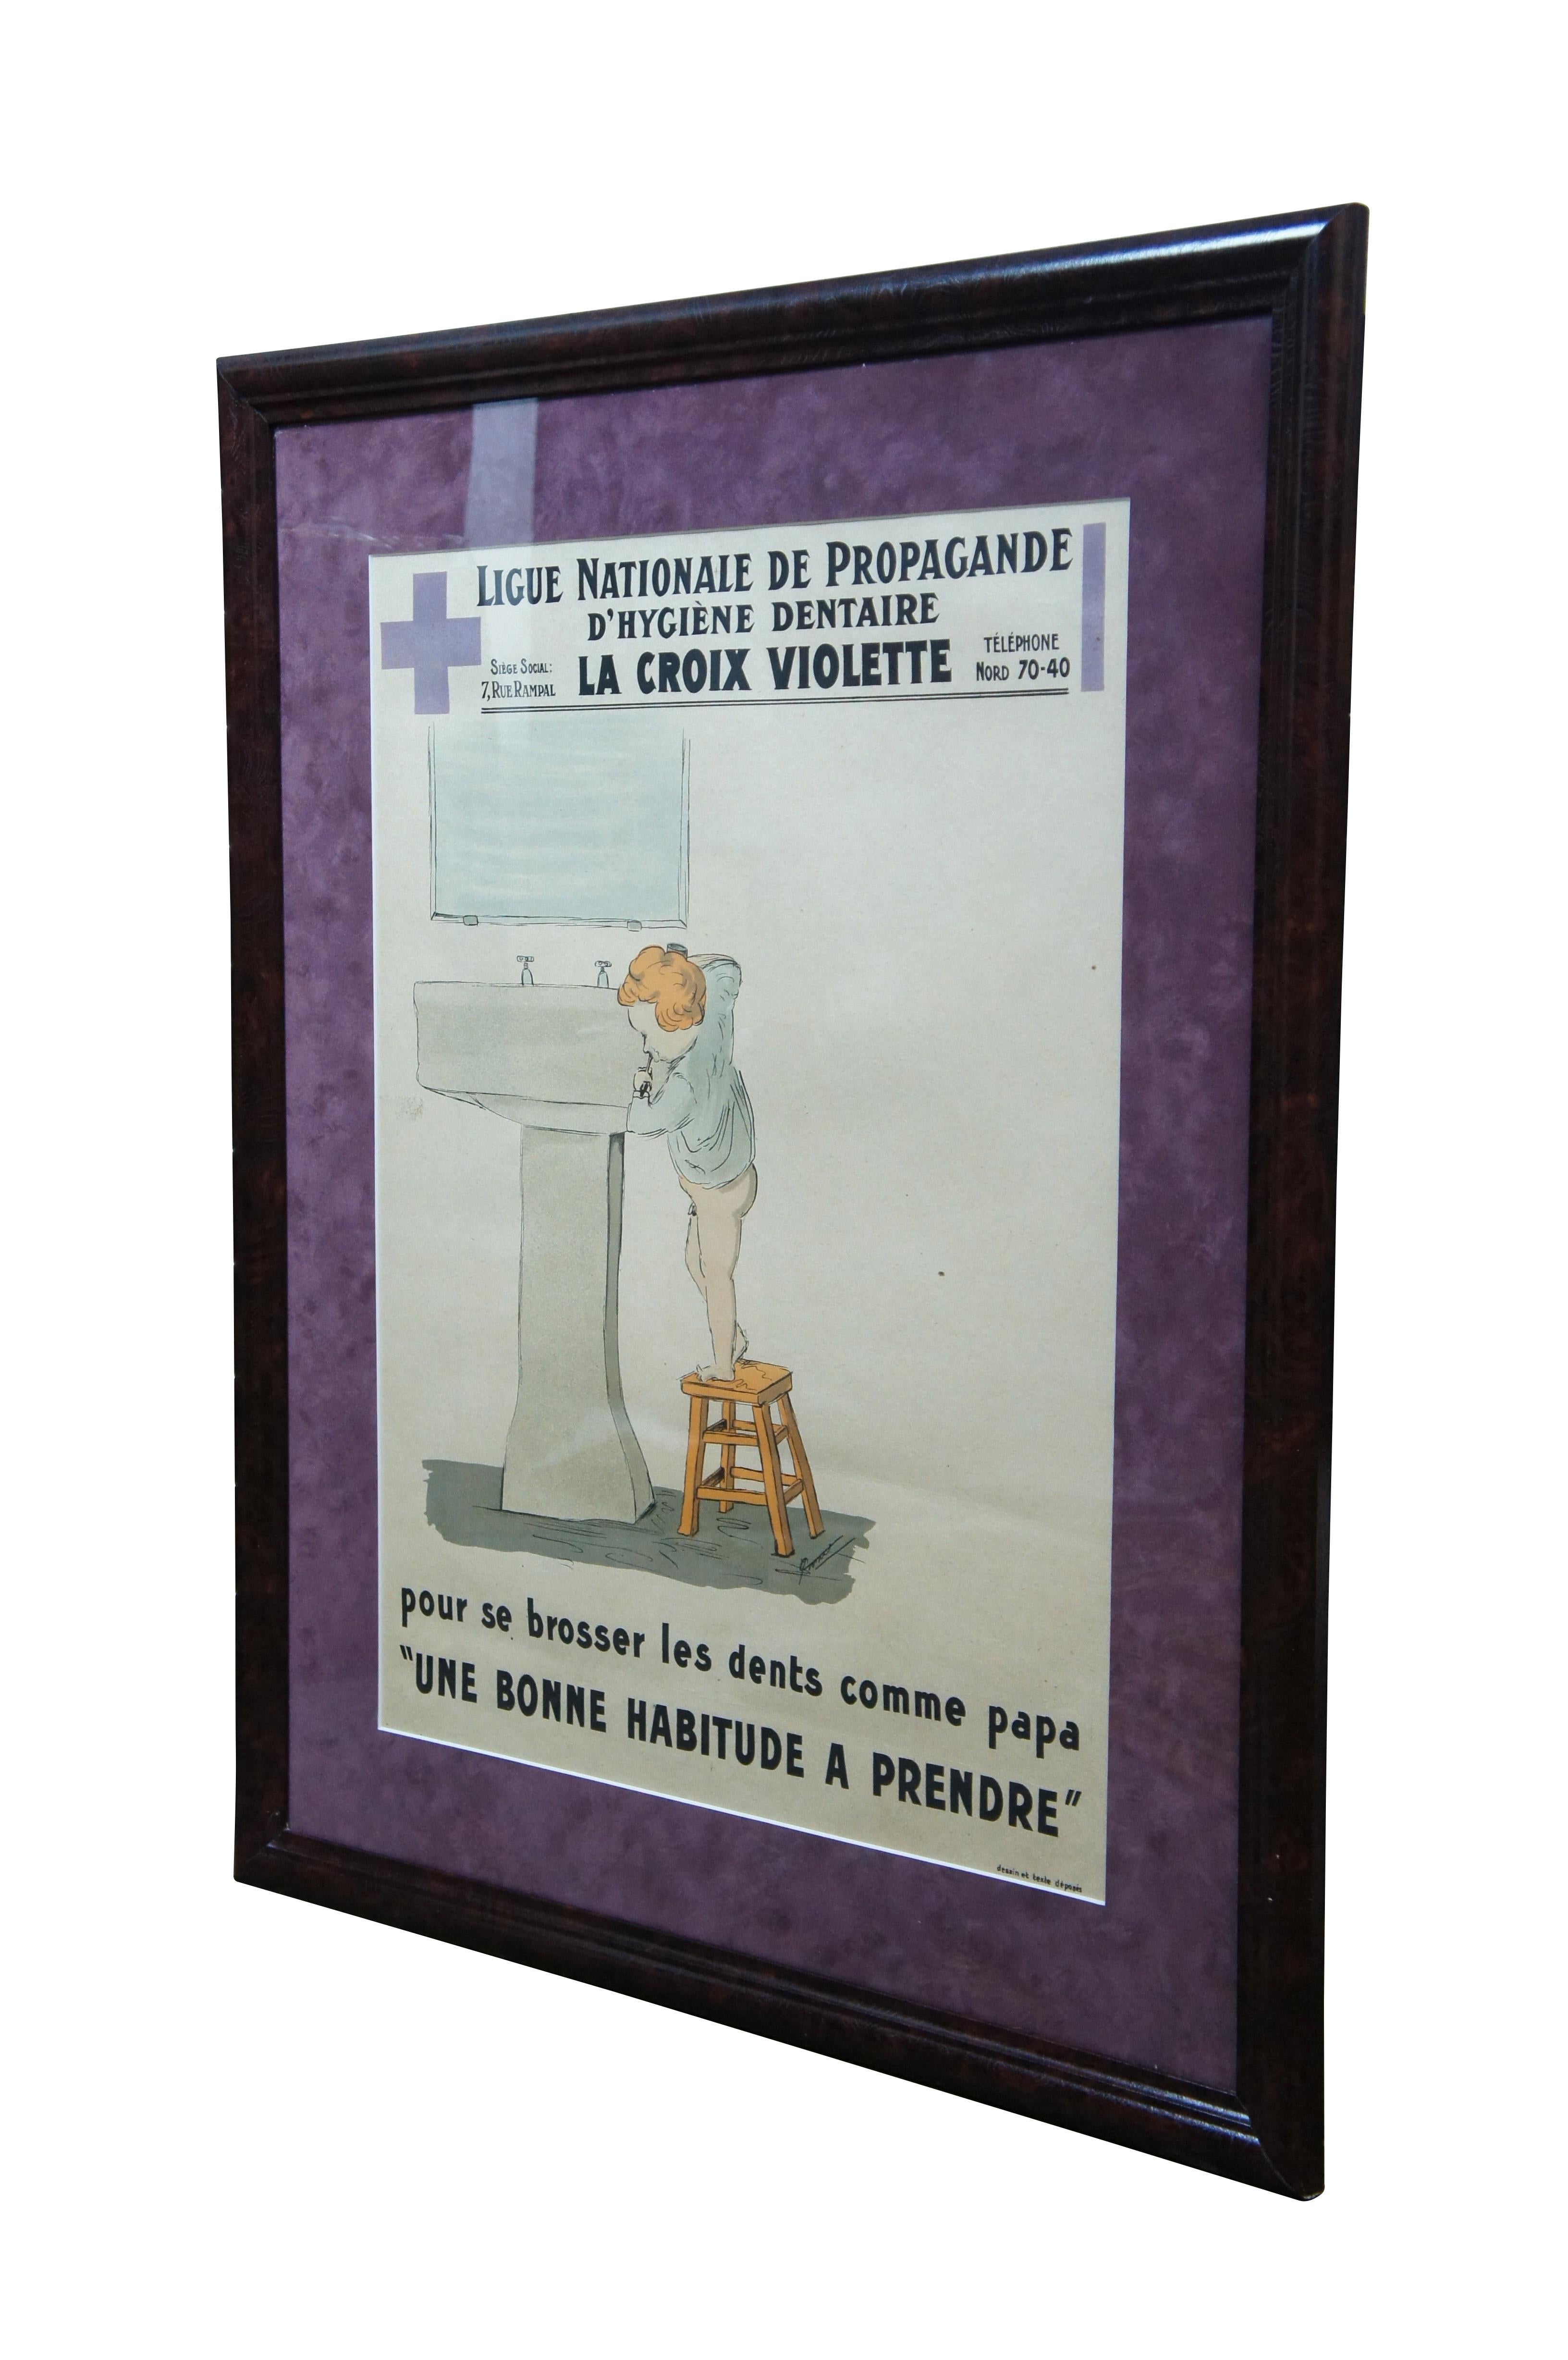 Circa 1930s French dental hygiene poster from the Ligue Nationale de Propagande D'Hygiene Dentaire - La Croix Violette (National Dental Hygiene Propaganda League - The Violet Cross). Shows an illustration of a child brushing their teeth / tooth,